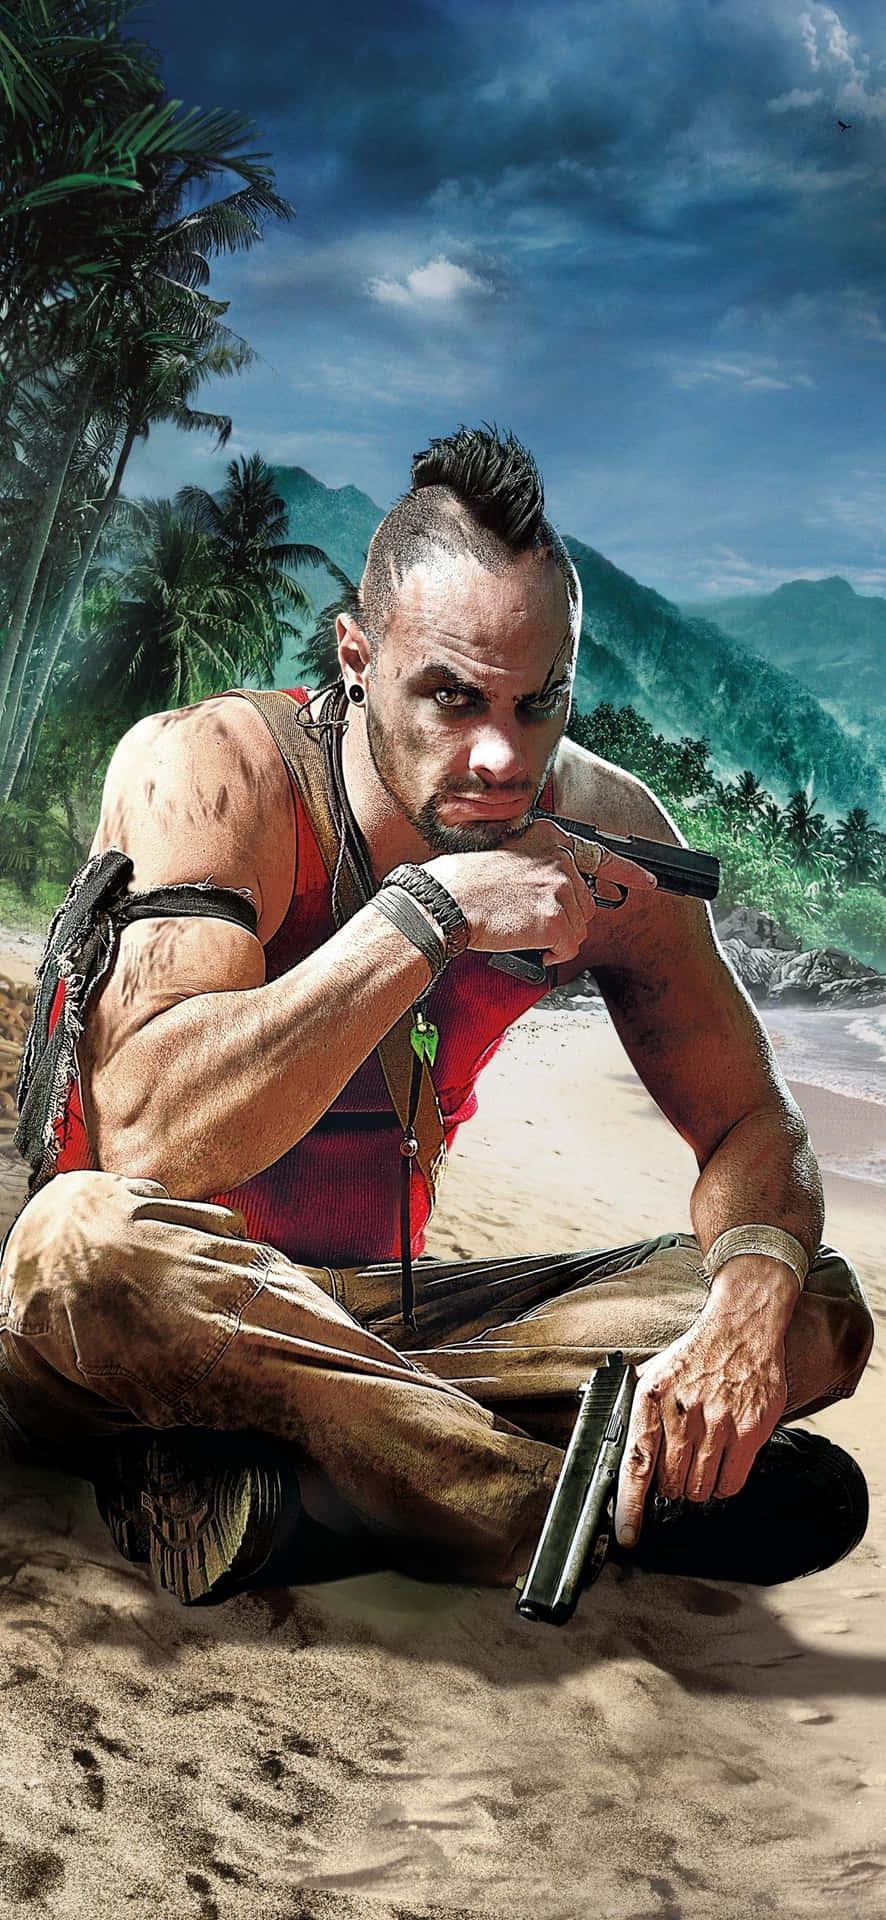 Iphone X Far Cry 3 Background Wallpaper